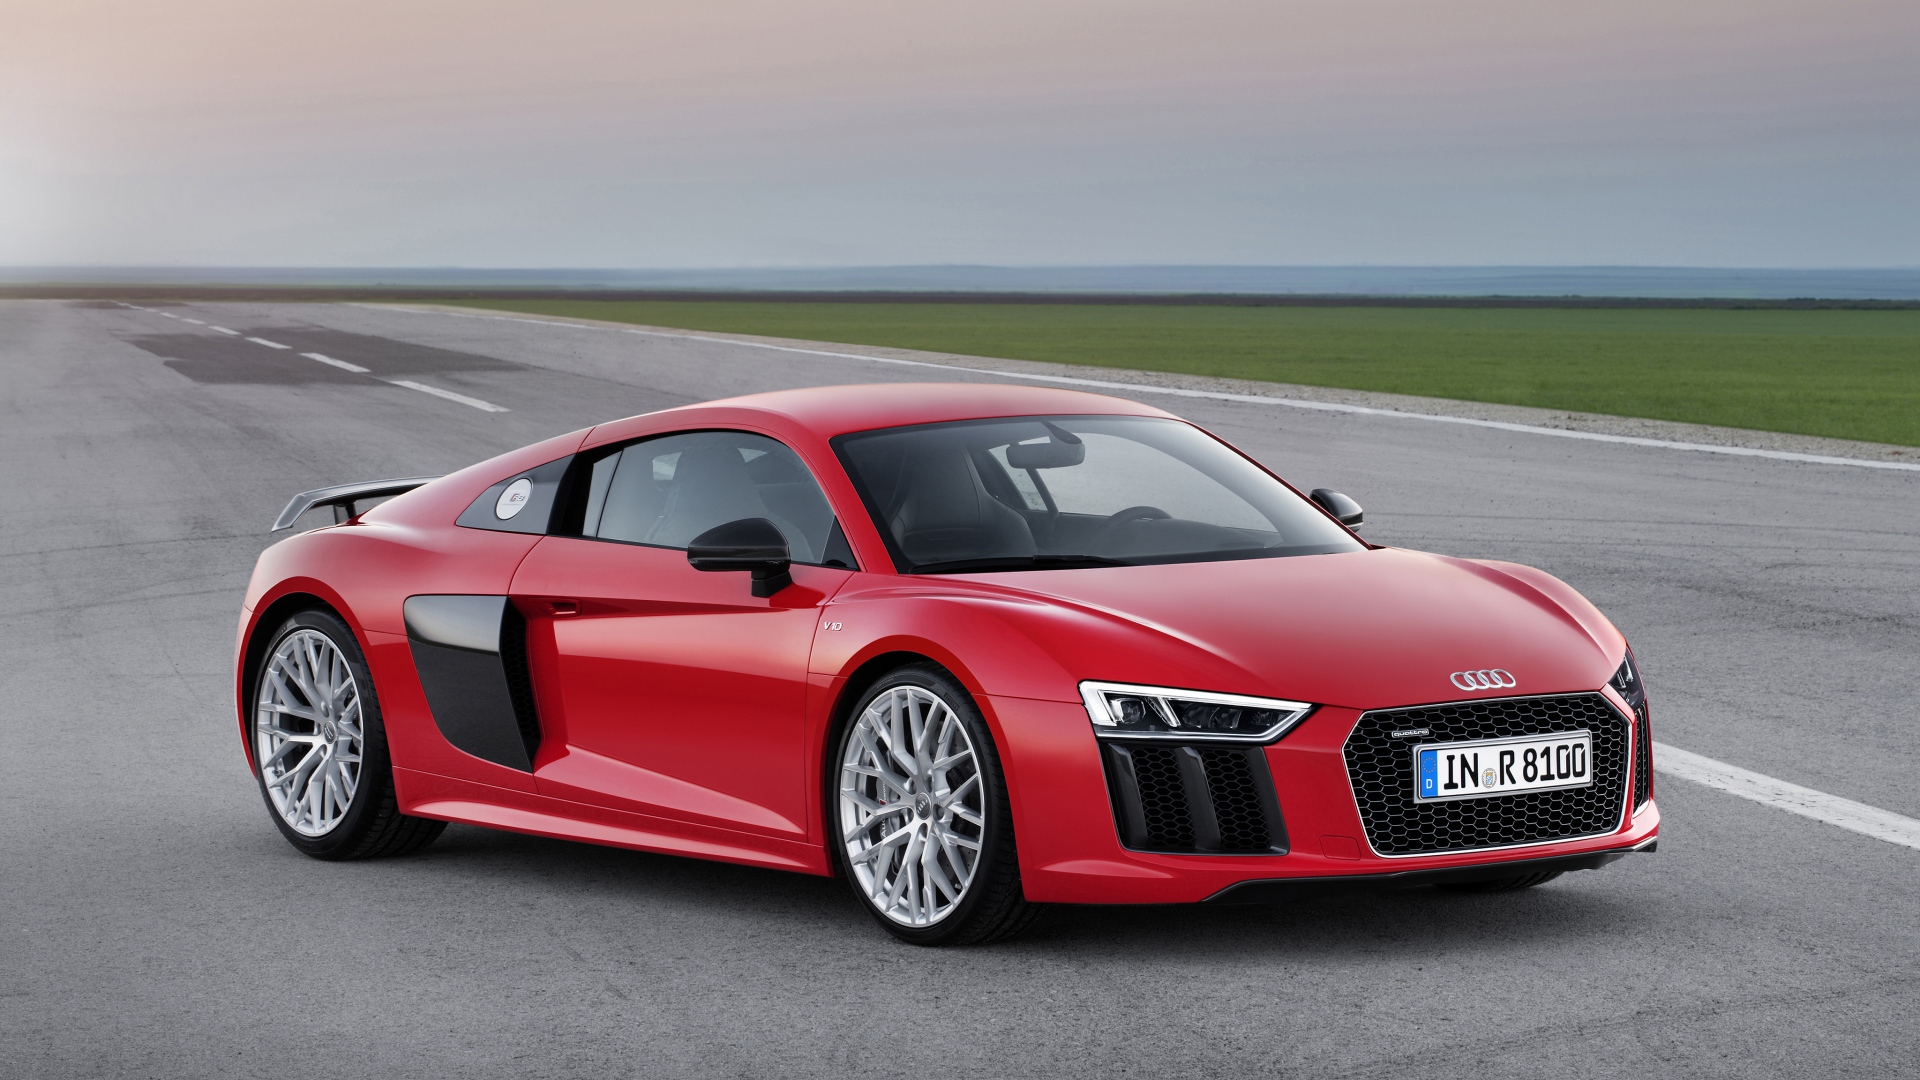 Audi R8 V10 2015 In Red Front And Side View 1920×1080 - Audi R8 2019 Red , HD Wallpaper & Backgrounds